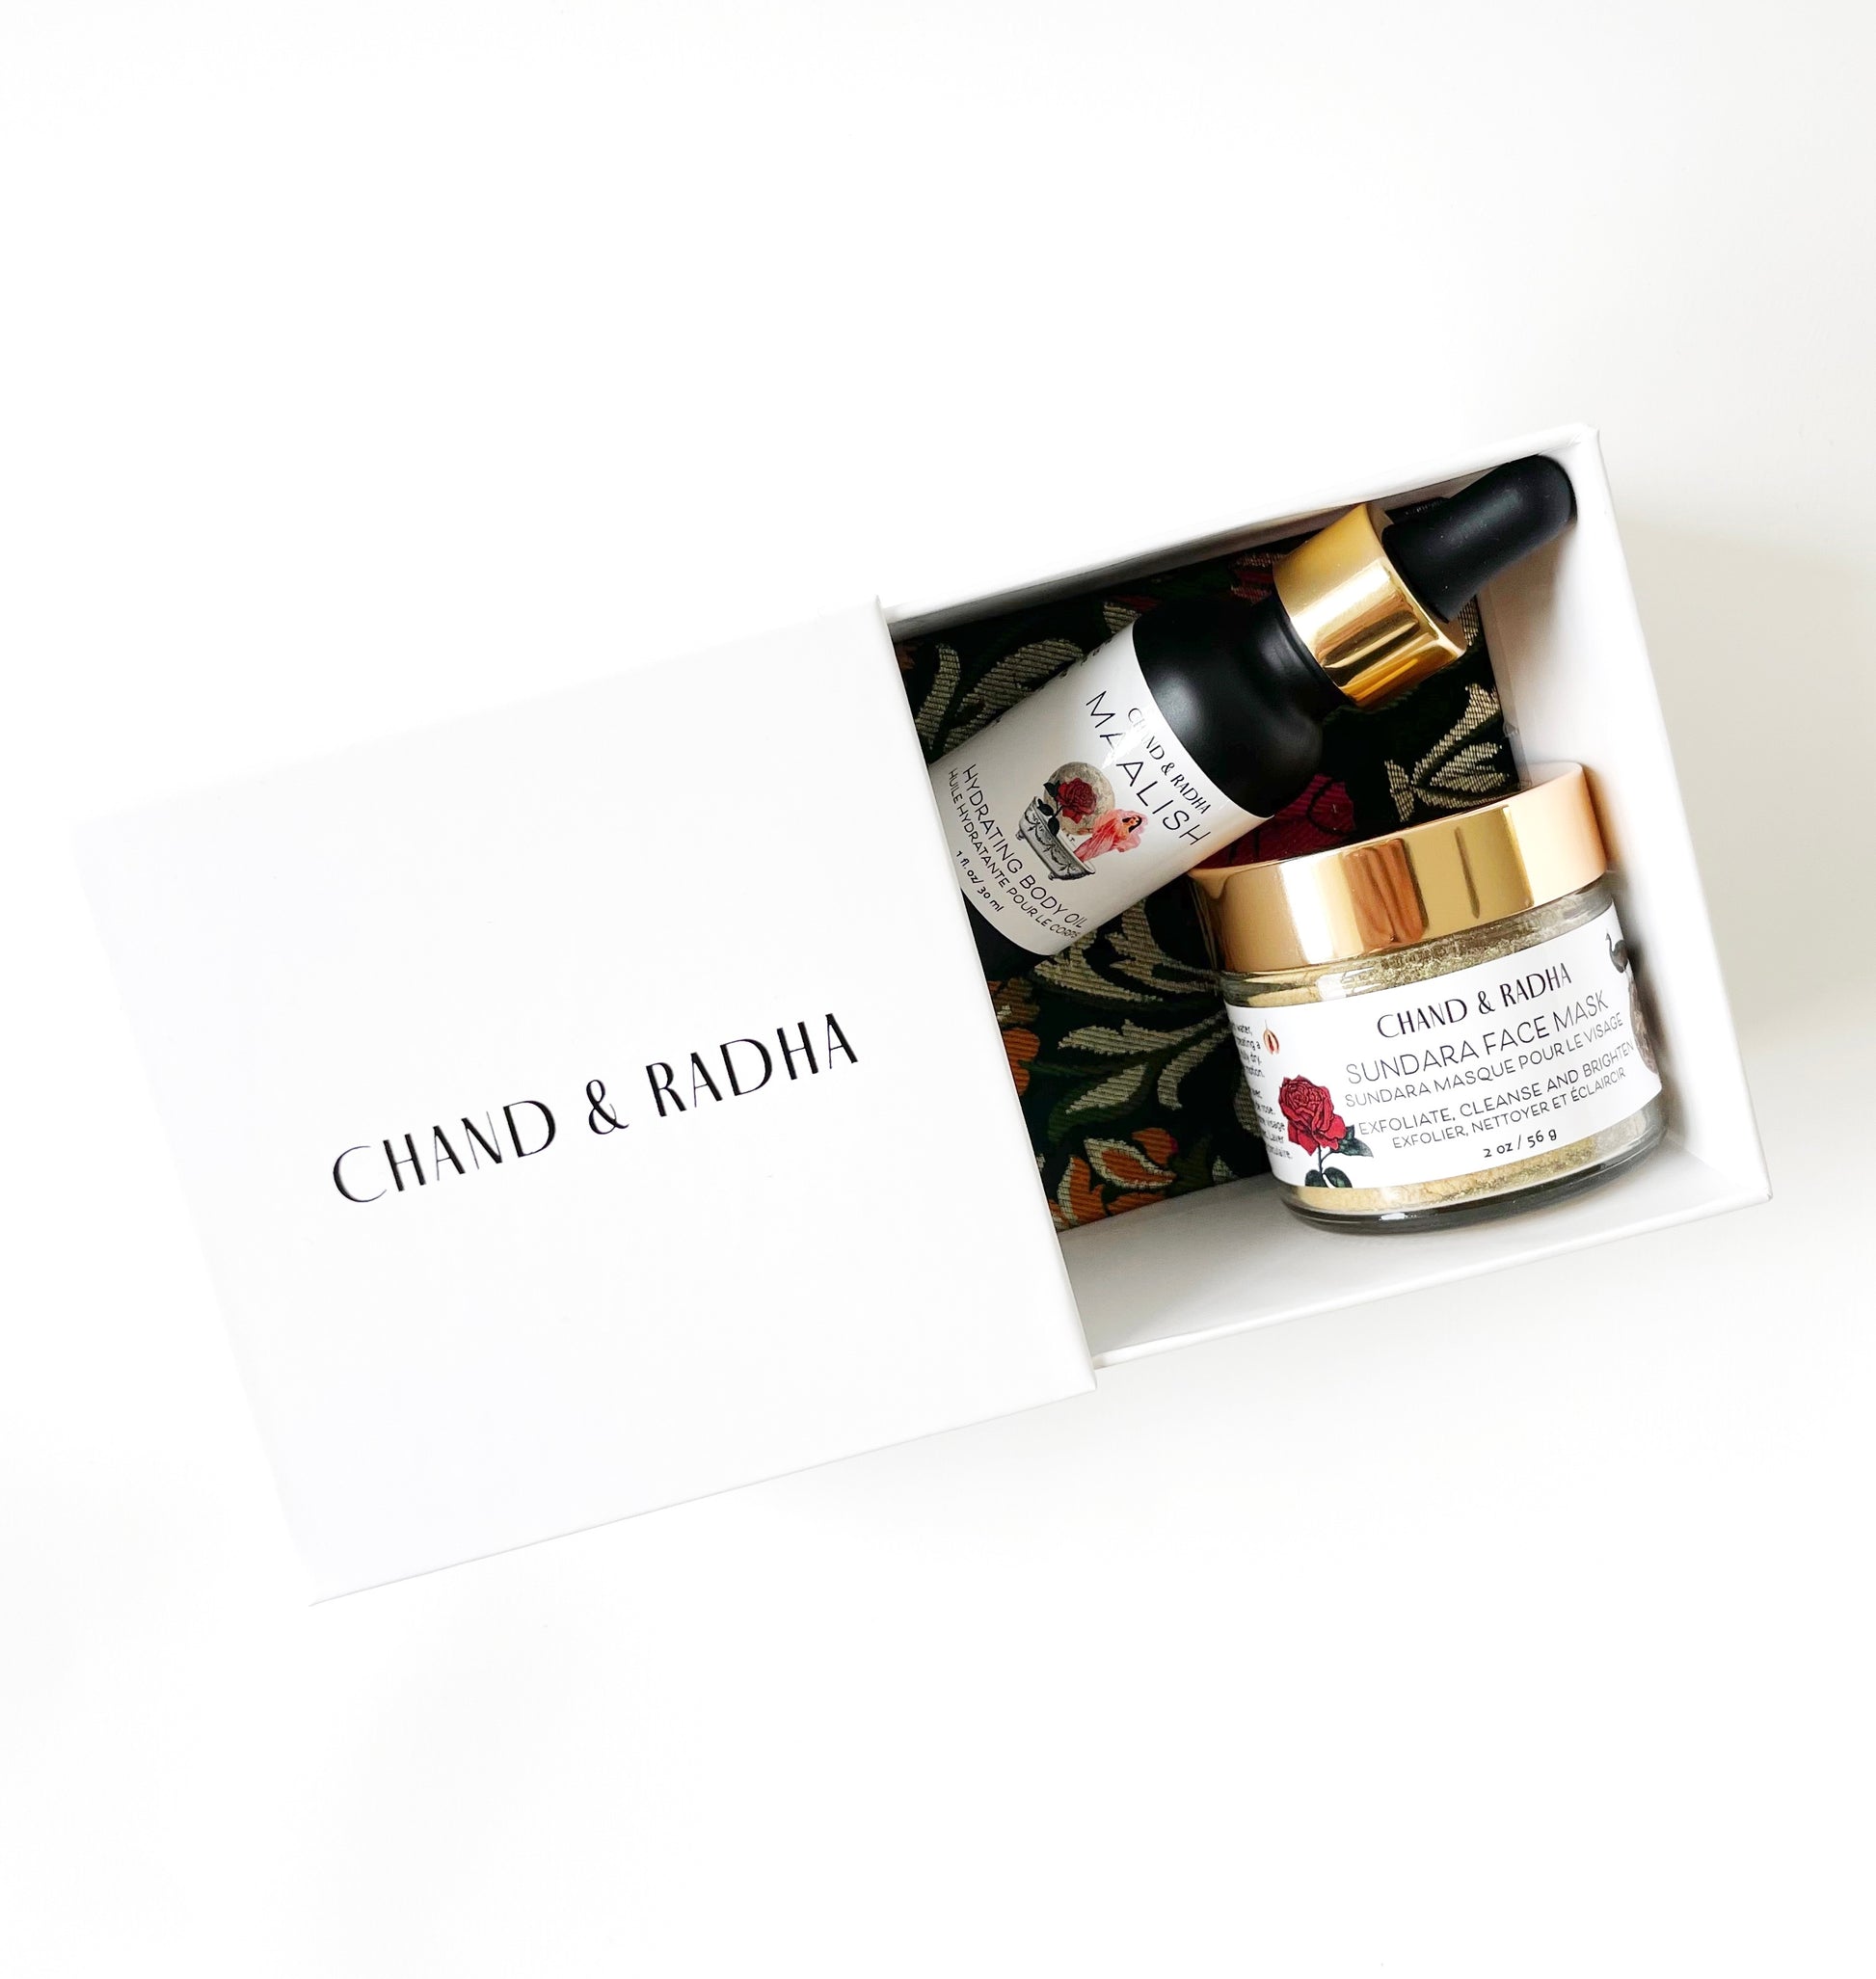 Clean Beauty - Chand & Radha - Natural Skincare